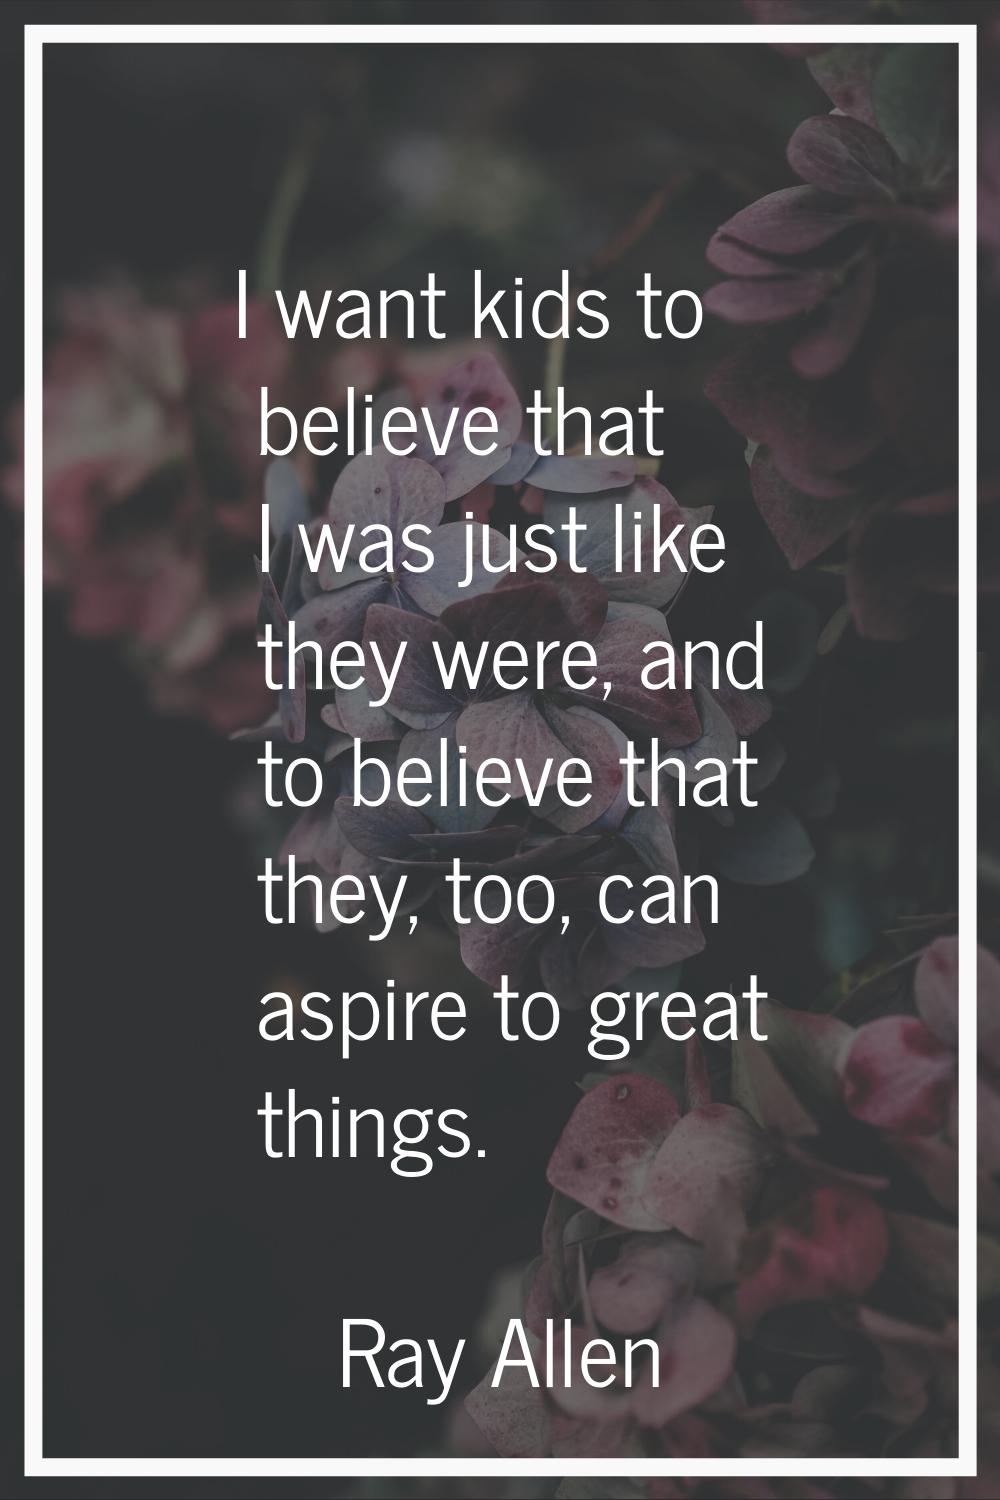 I want kids to believe that I was just like they were, and to believe that they, too, can aspire to